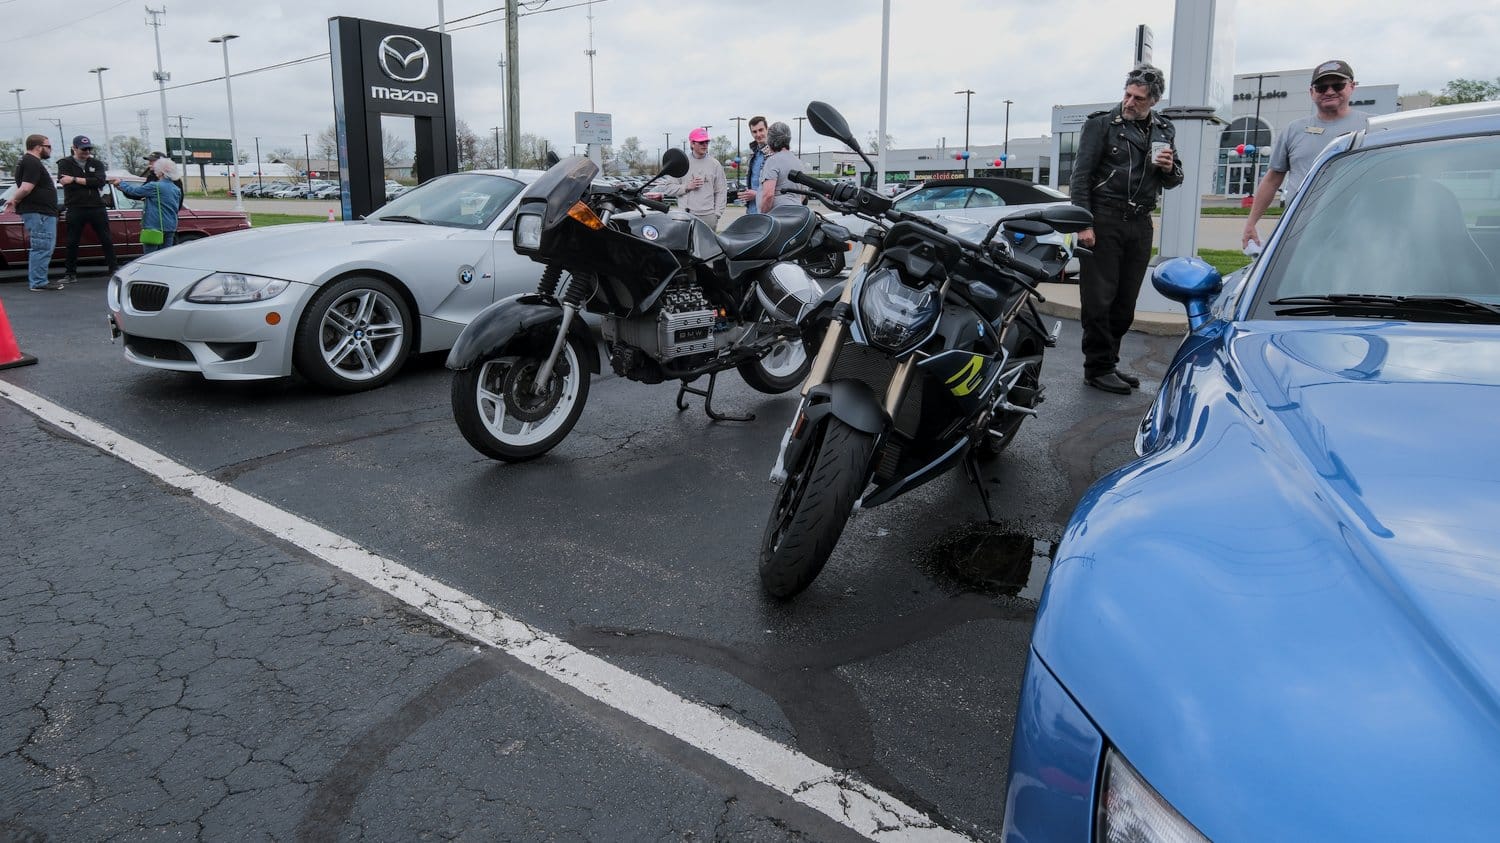 Two BMW motorcycles between BMW cars.